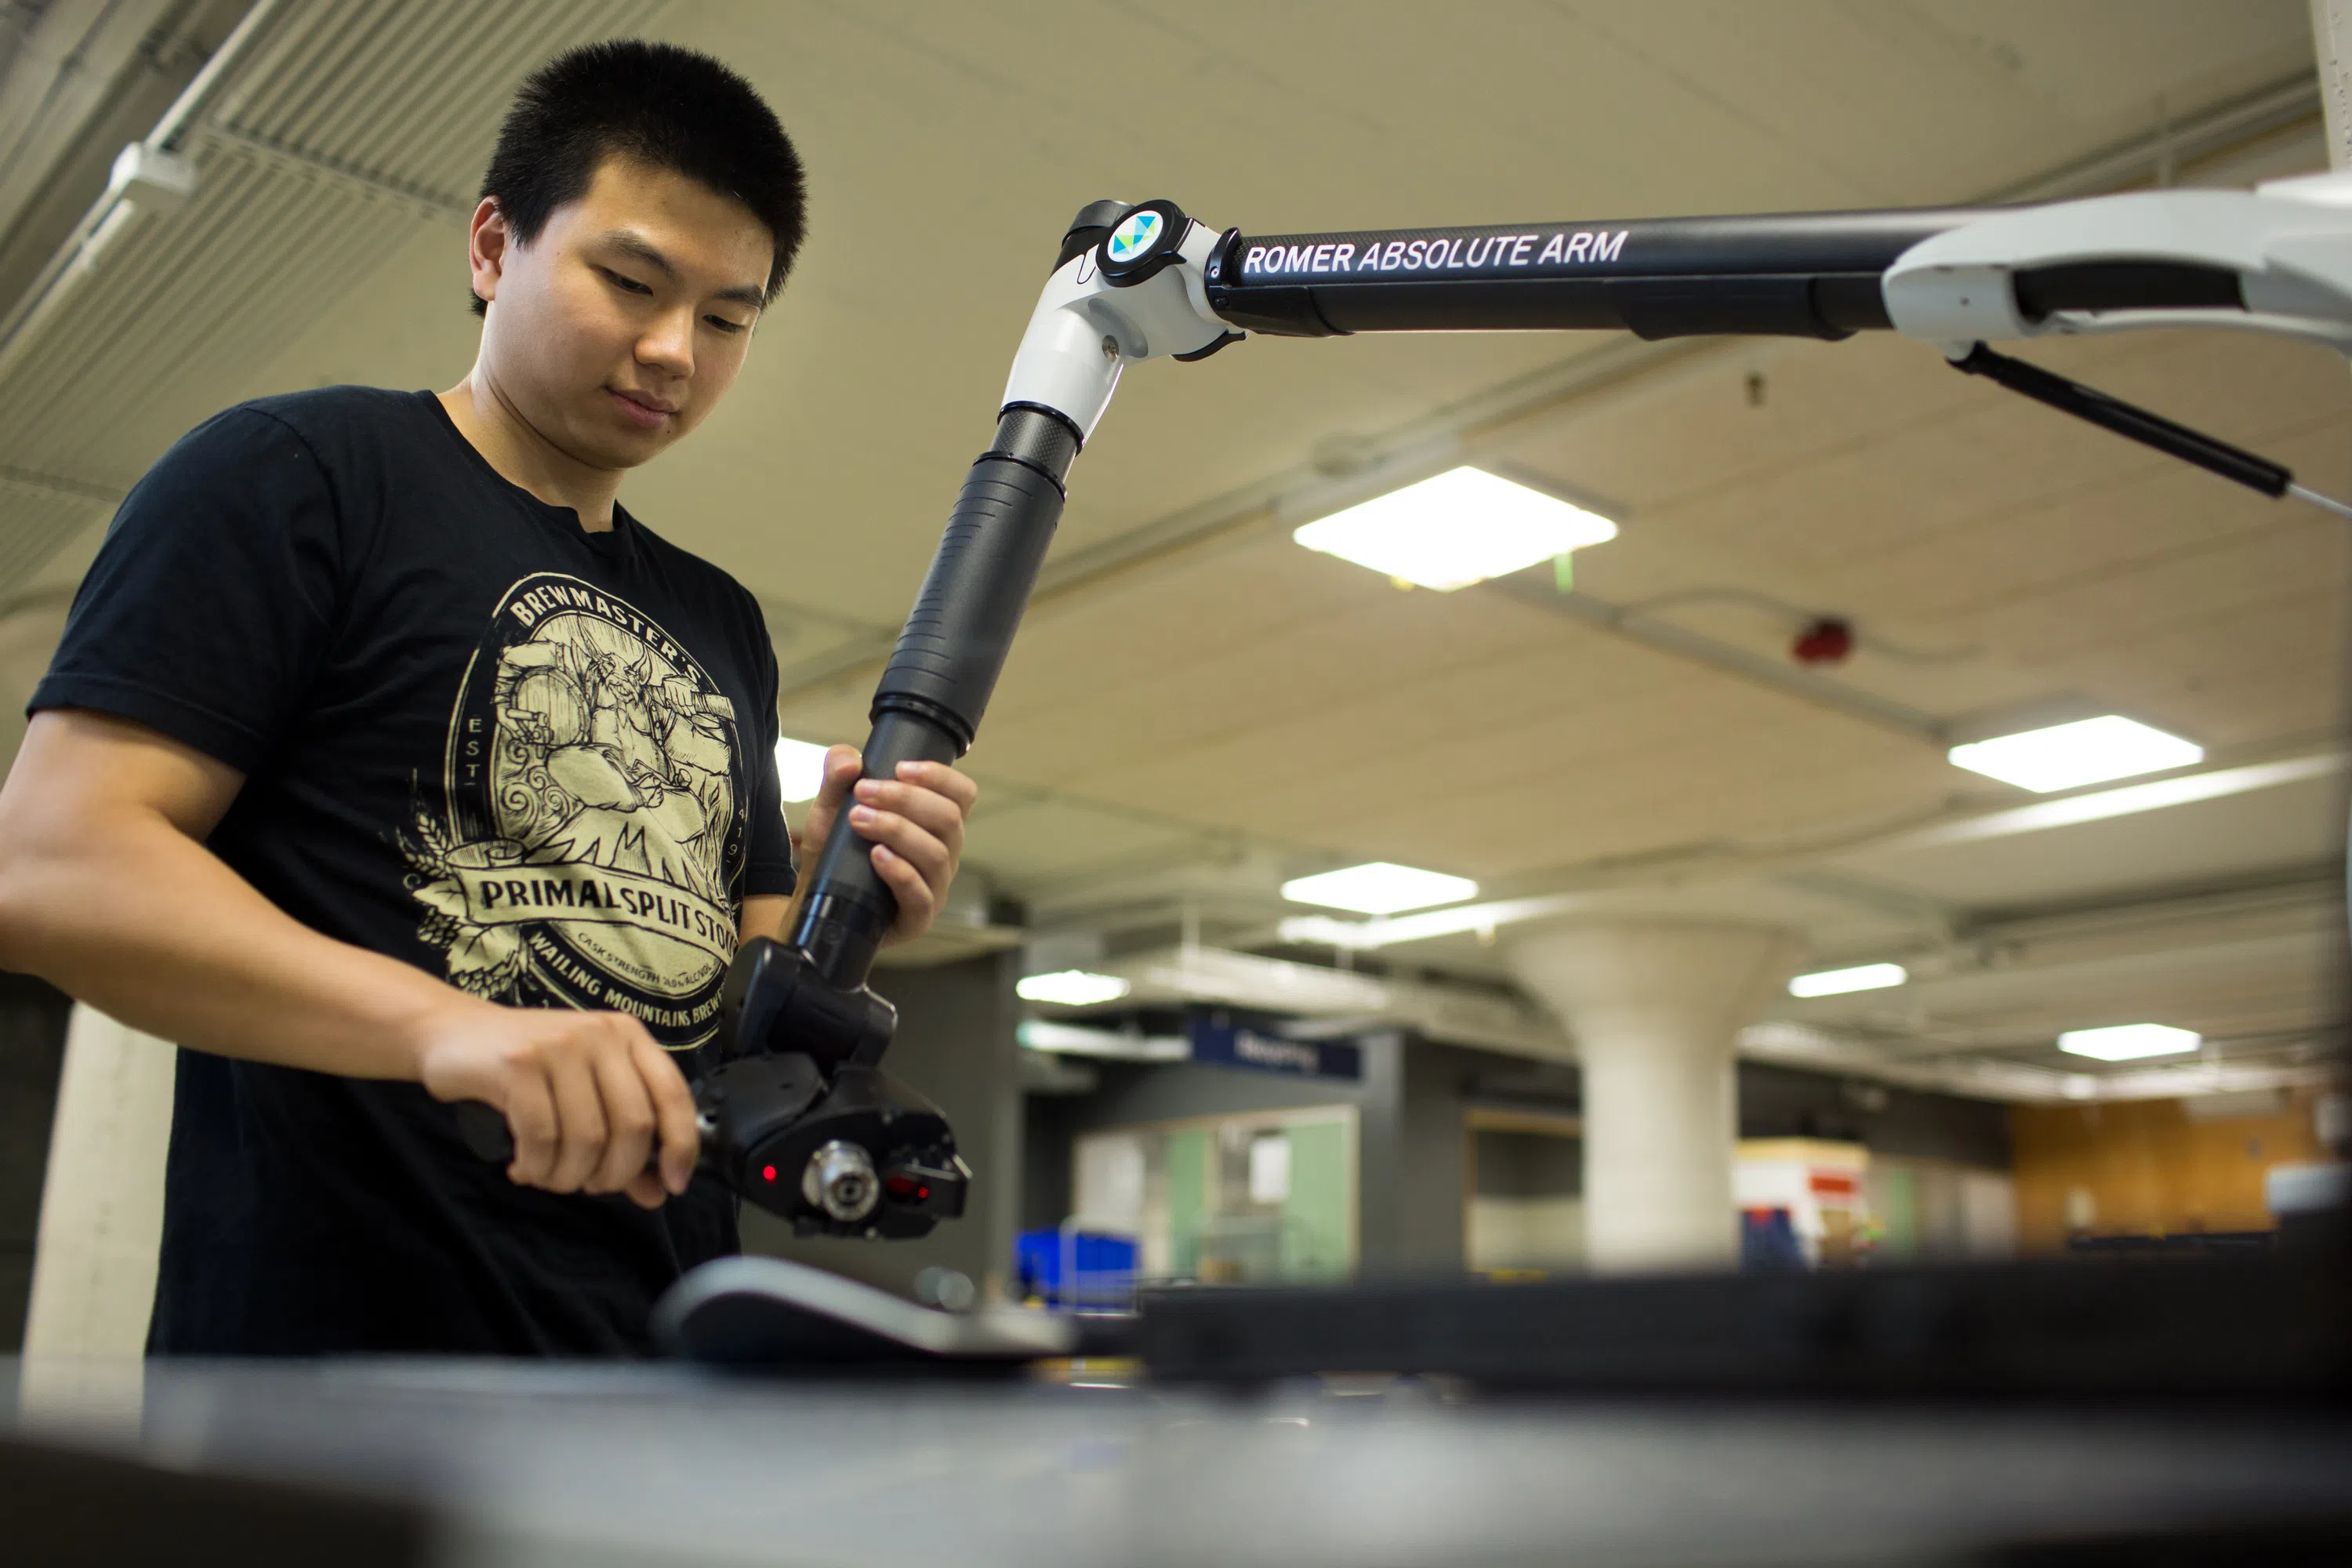 A student works with robotic arm technology